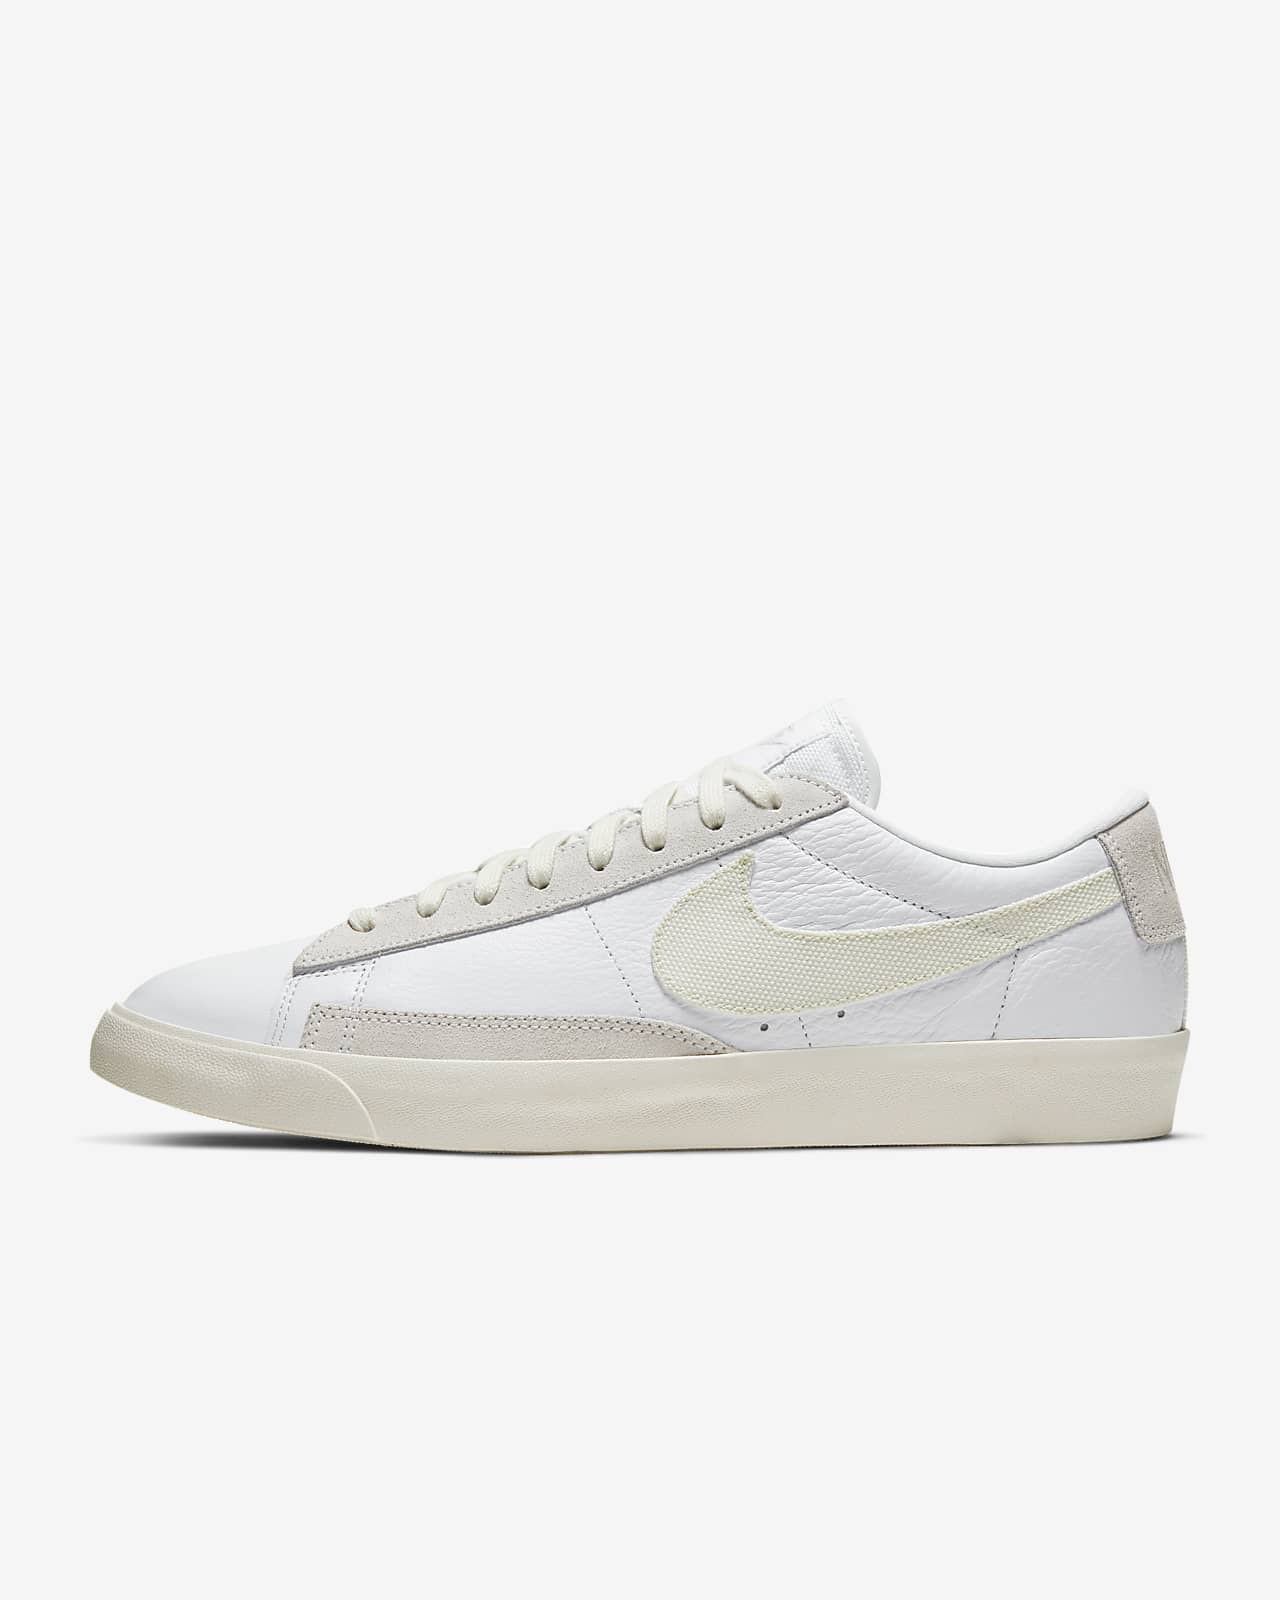 Nike Blazer Low Leather Shoes Review